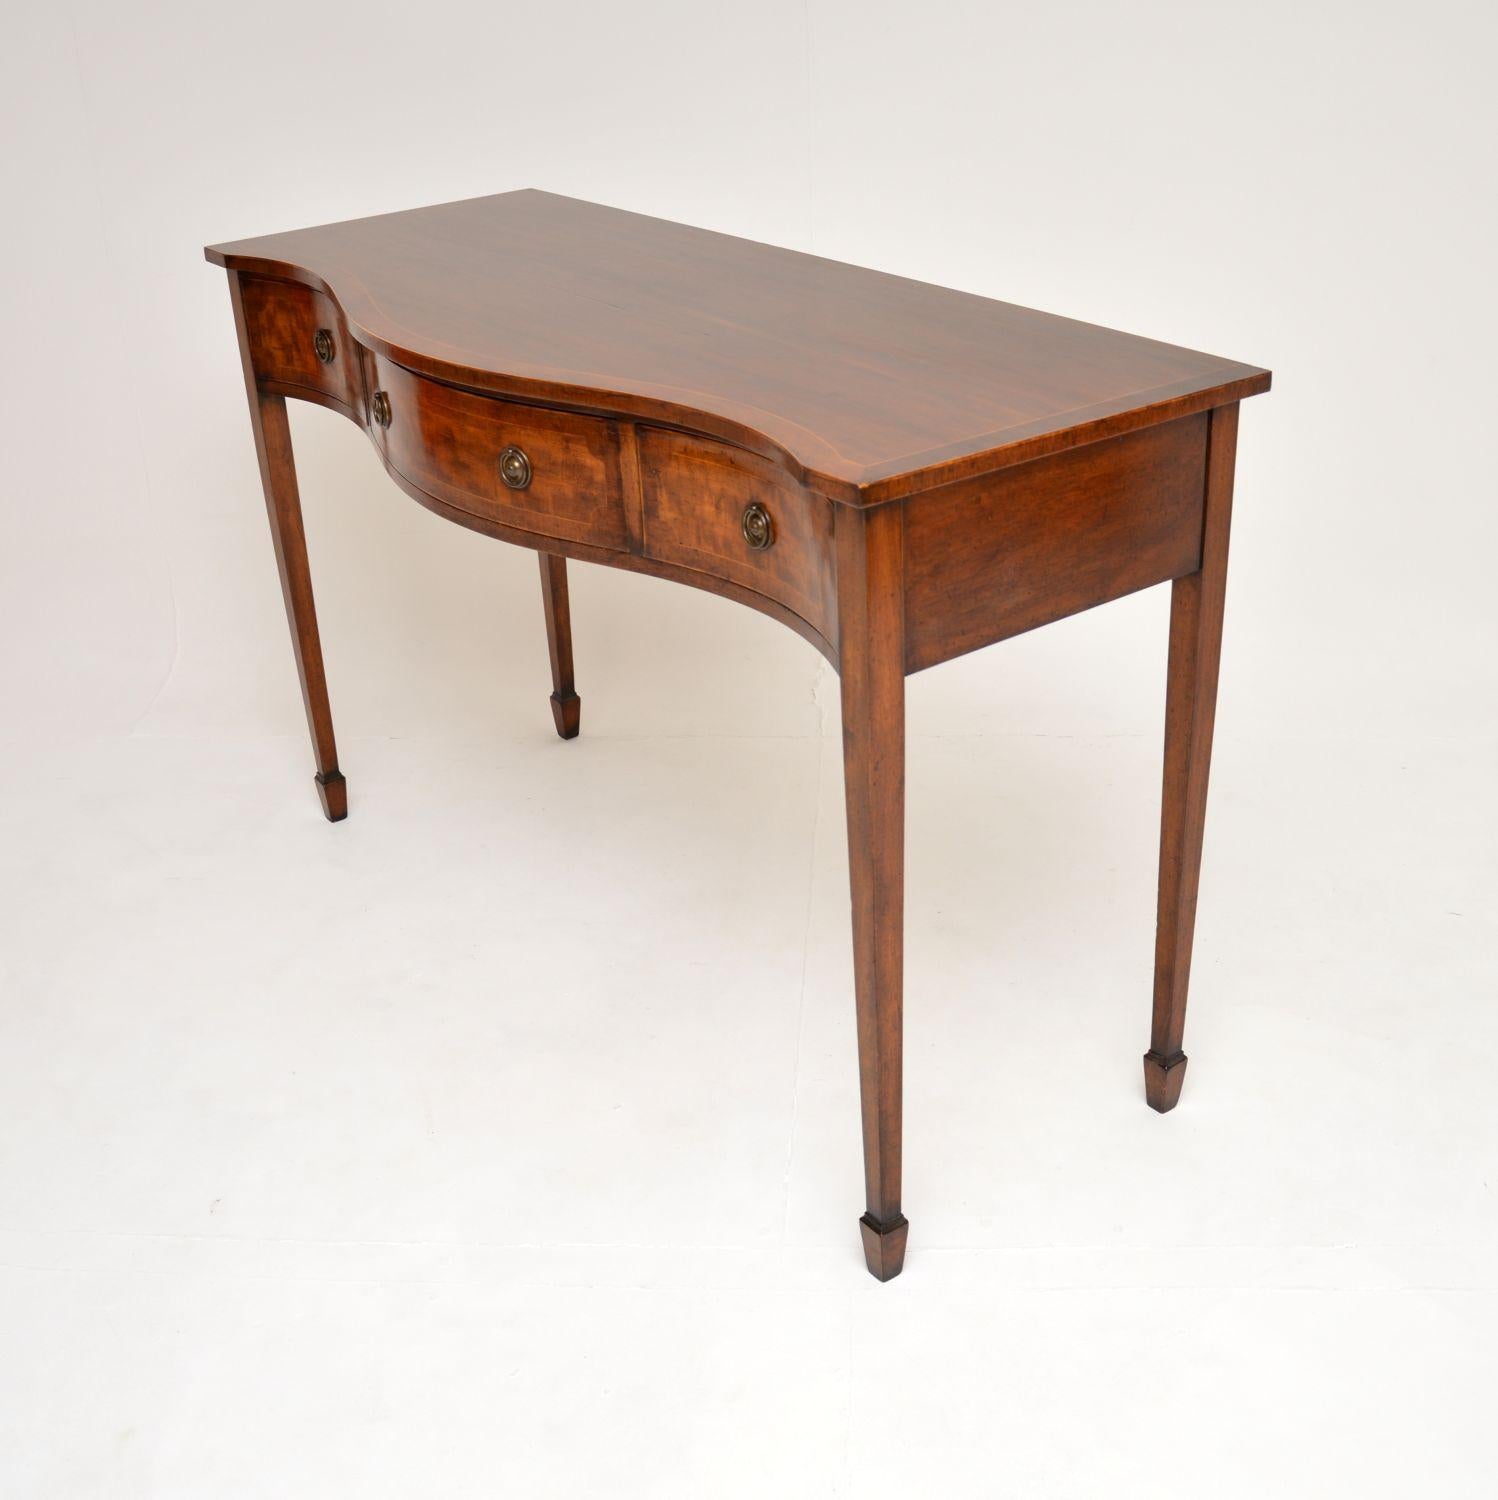 British Antique Sheraton Style Inlaid Console Table